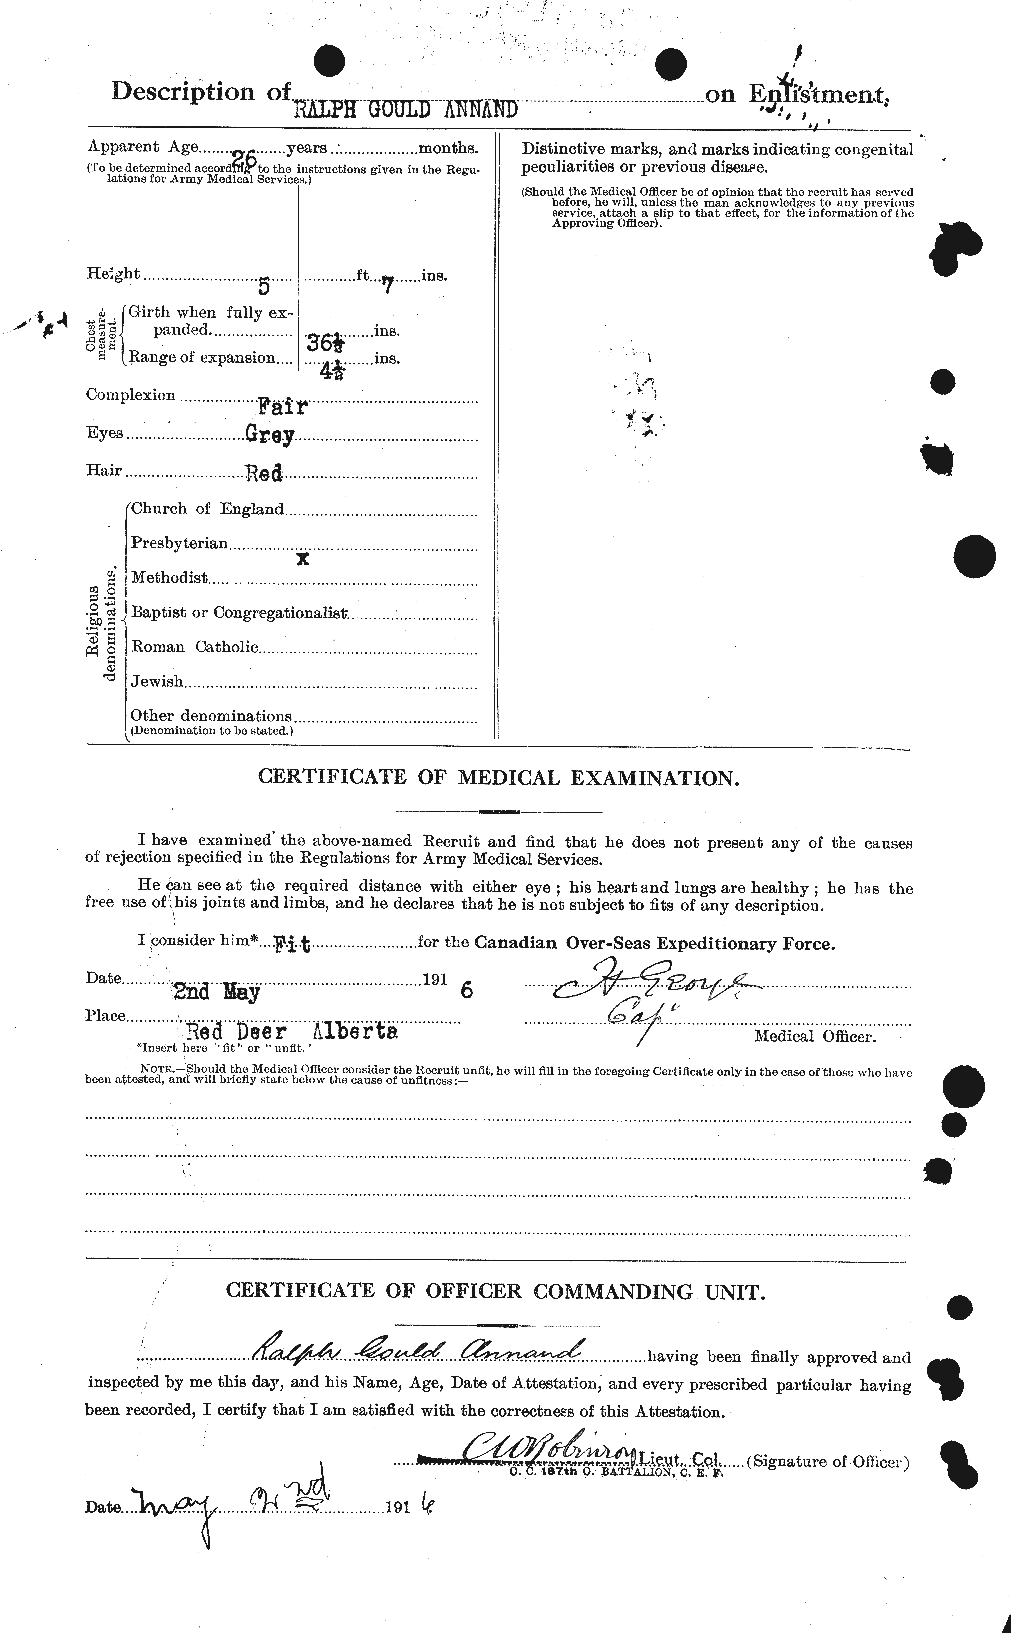 Personnel Records of the First World War - CEF 212488b